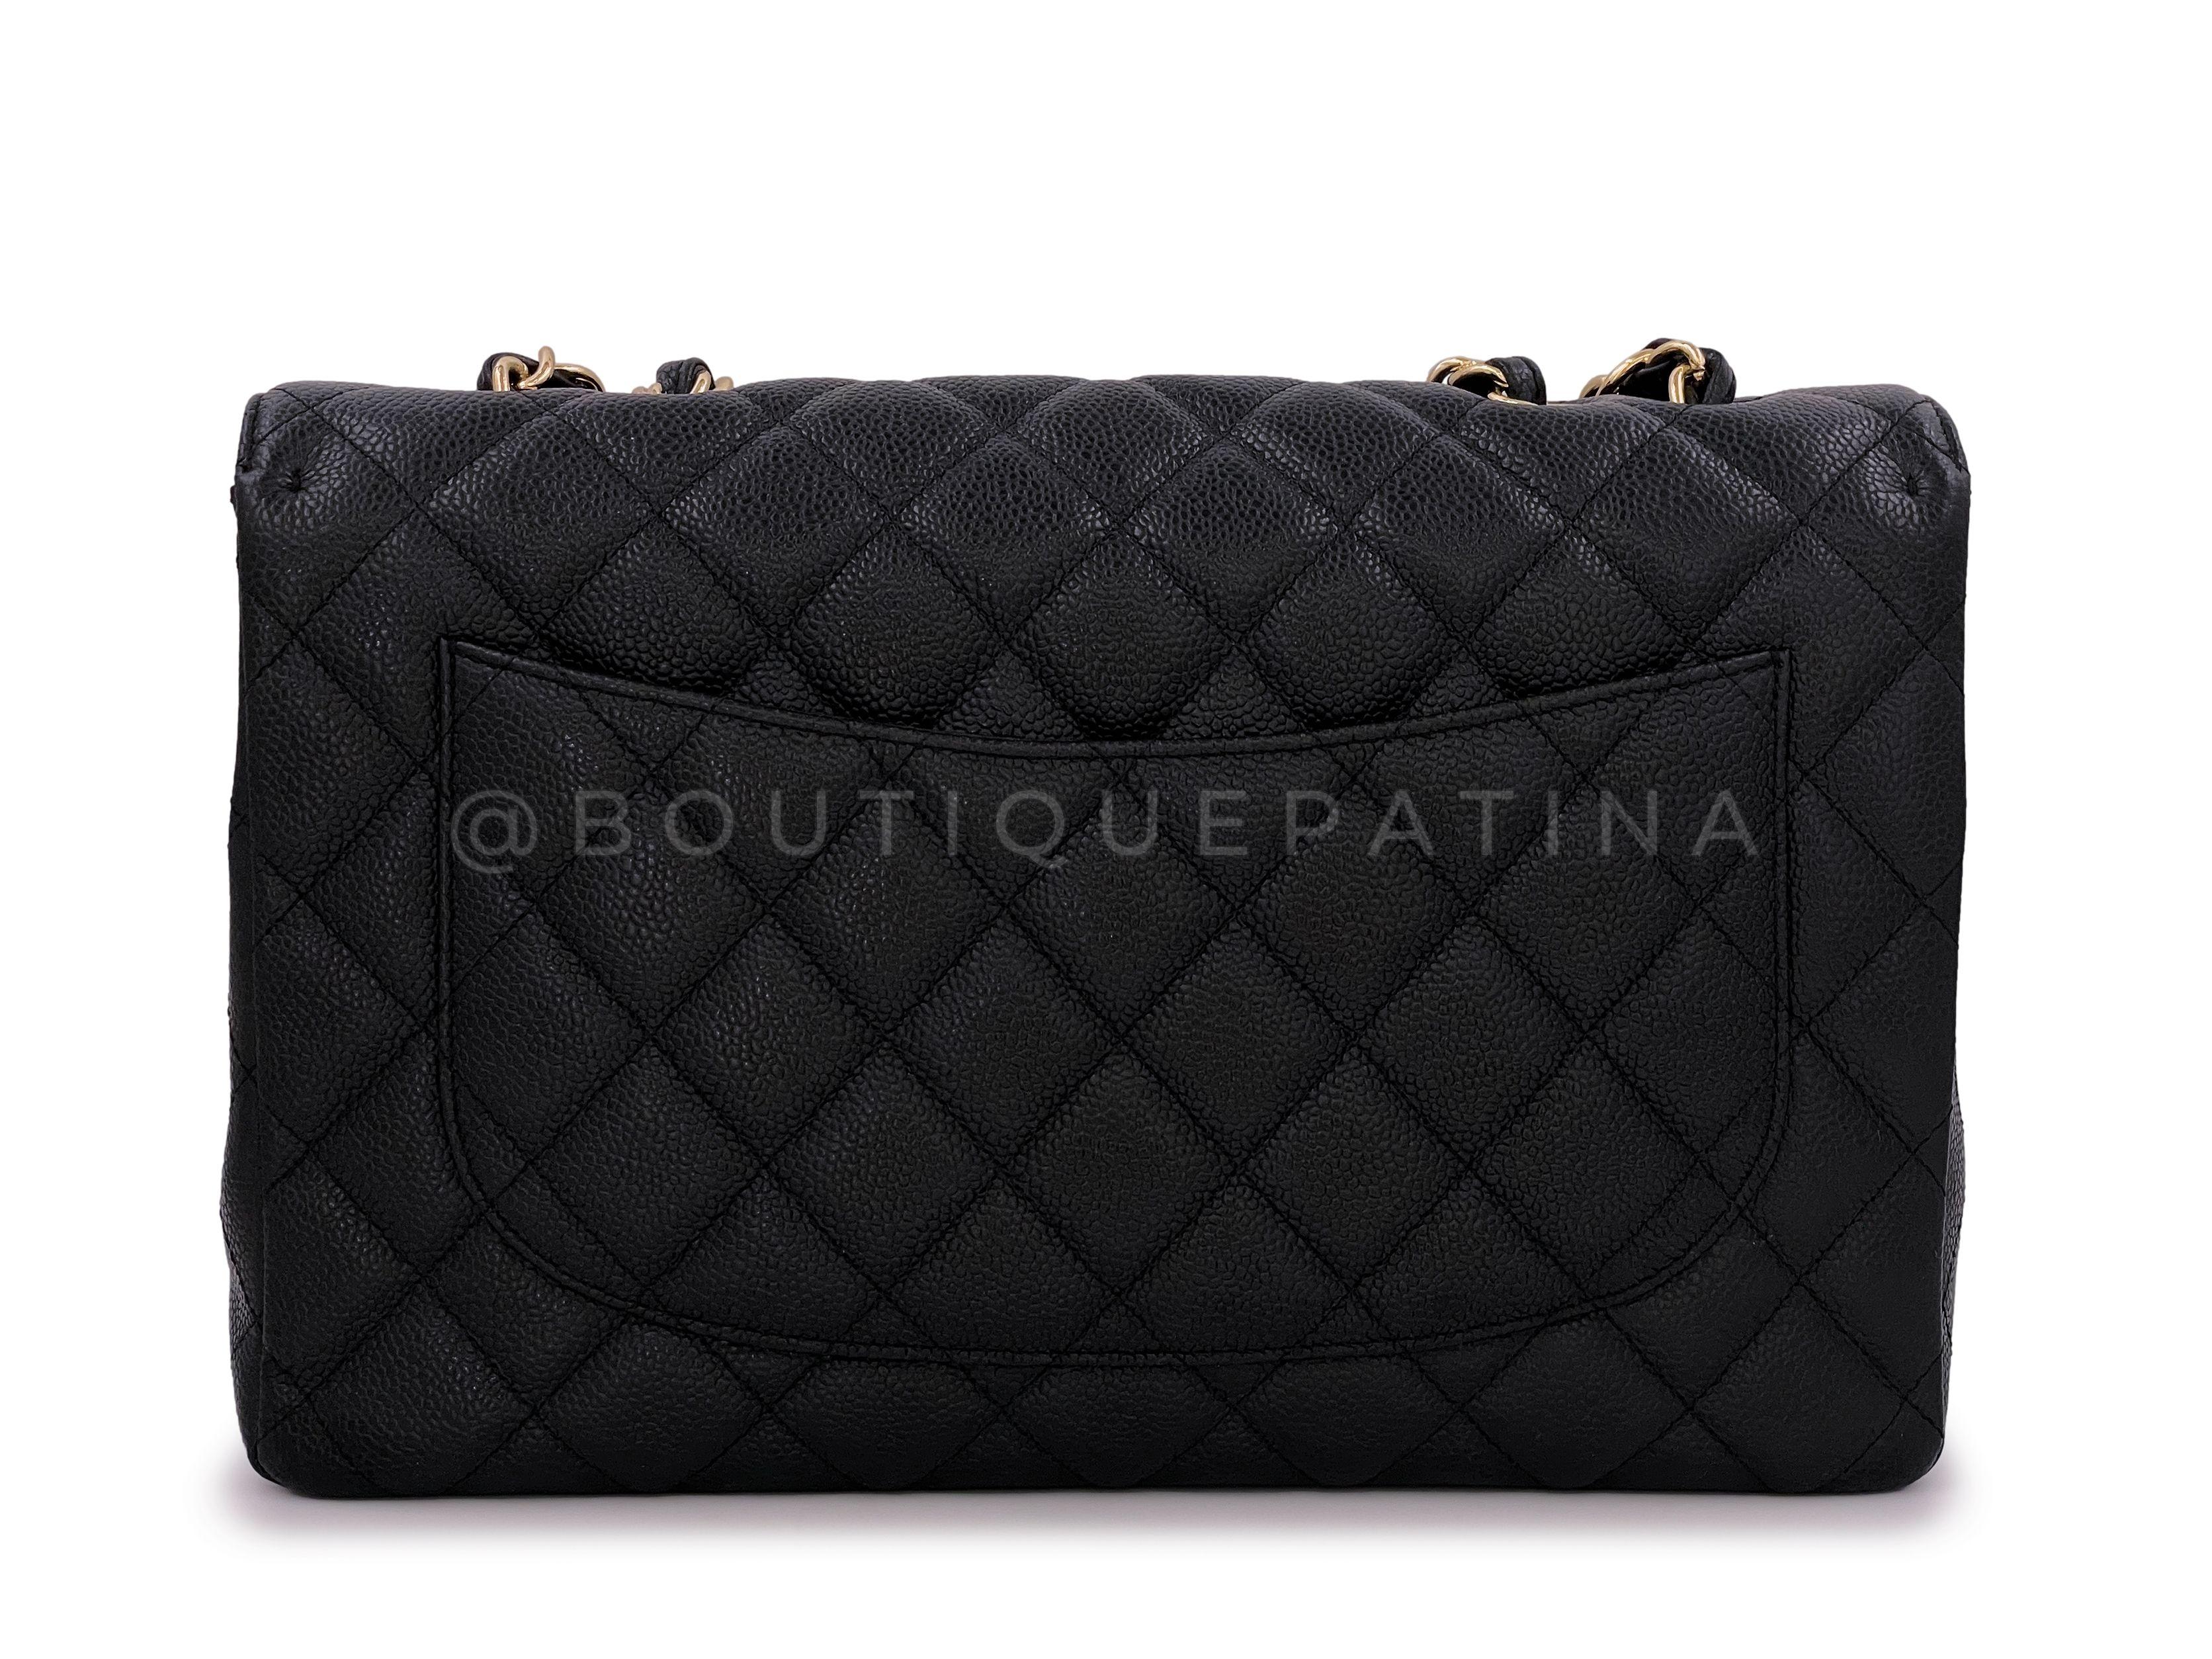 Chanel Black Caviar Jumbo Classic Flap Bag Single GHW 65108 In Excellent Condition For Sale In Costa Mesa, CA